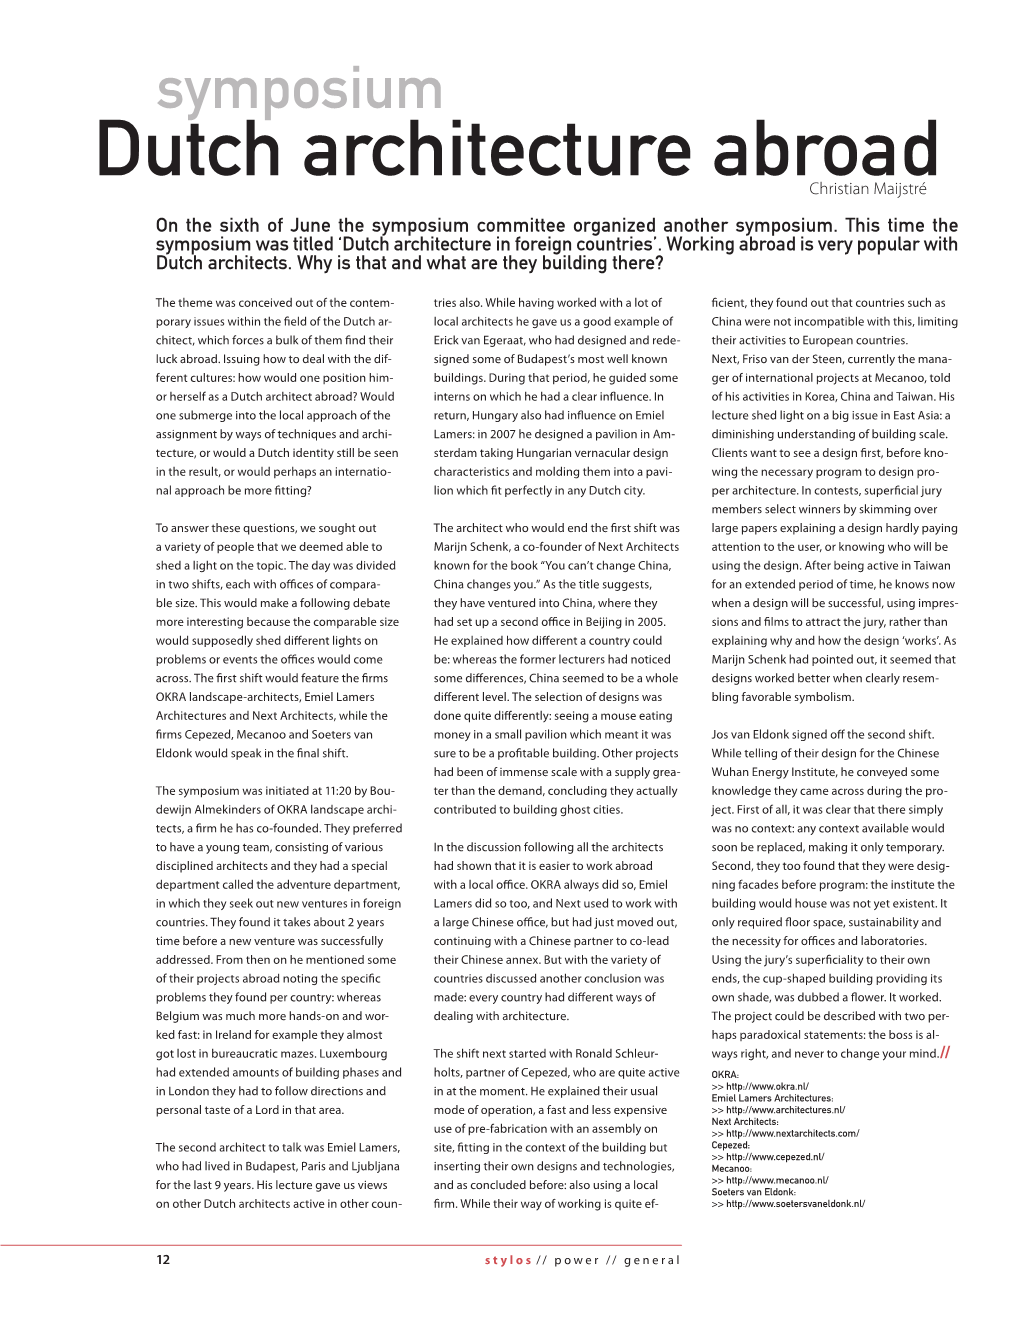 Dutch Architecture Abroad Christian Maijstré on the Sixth of June the Symposium Committee Organized Another Symposium